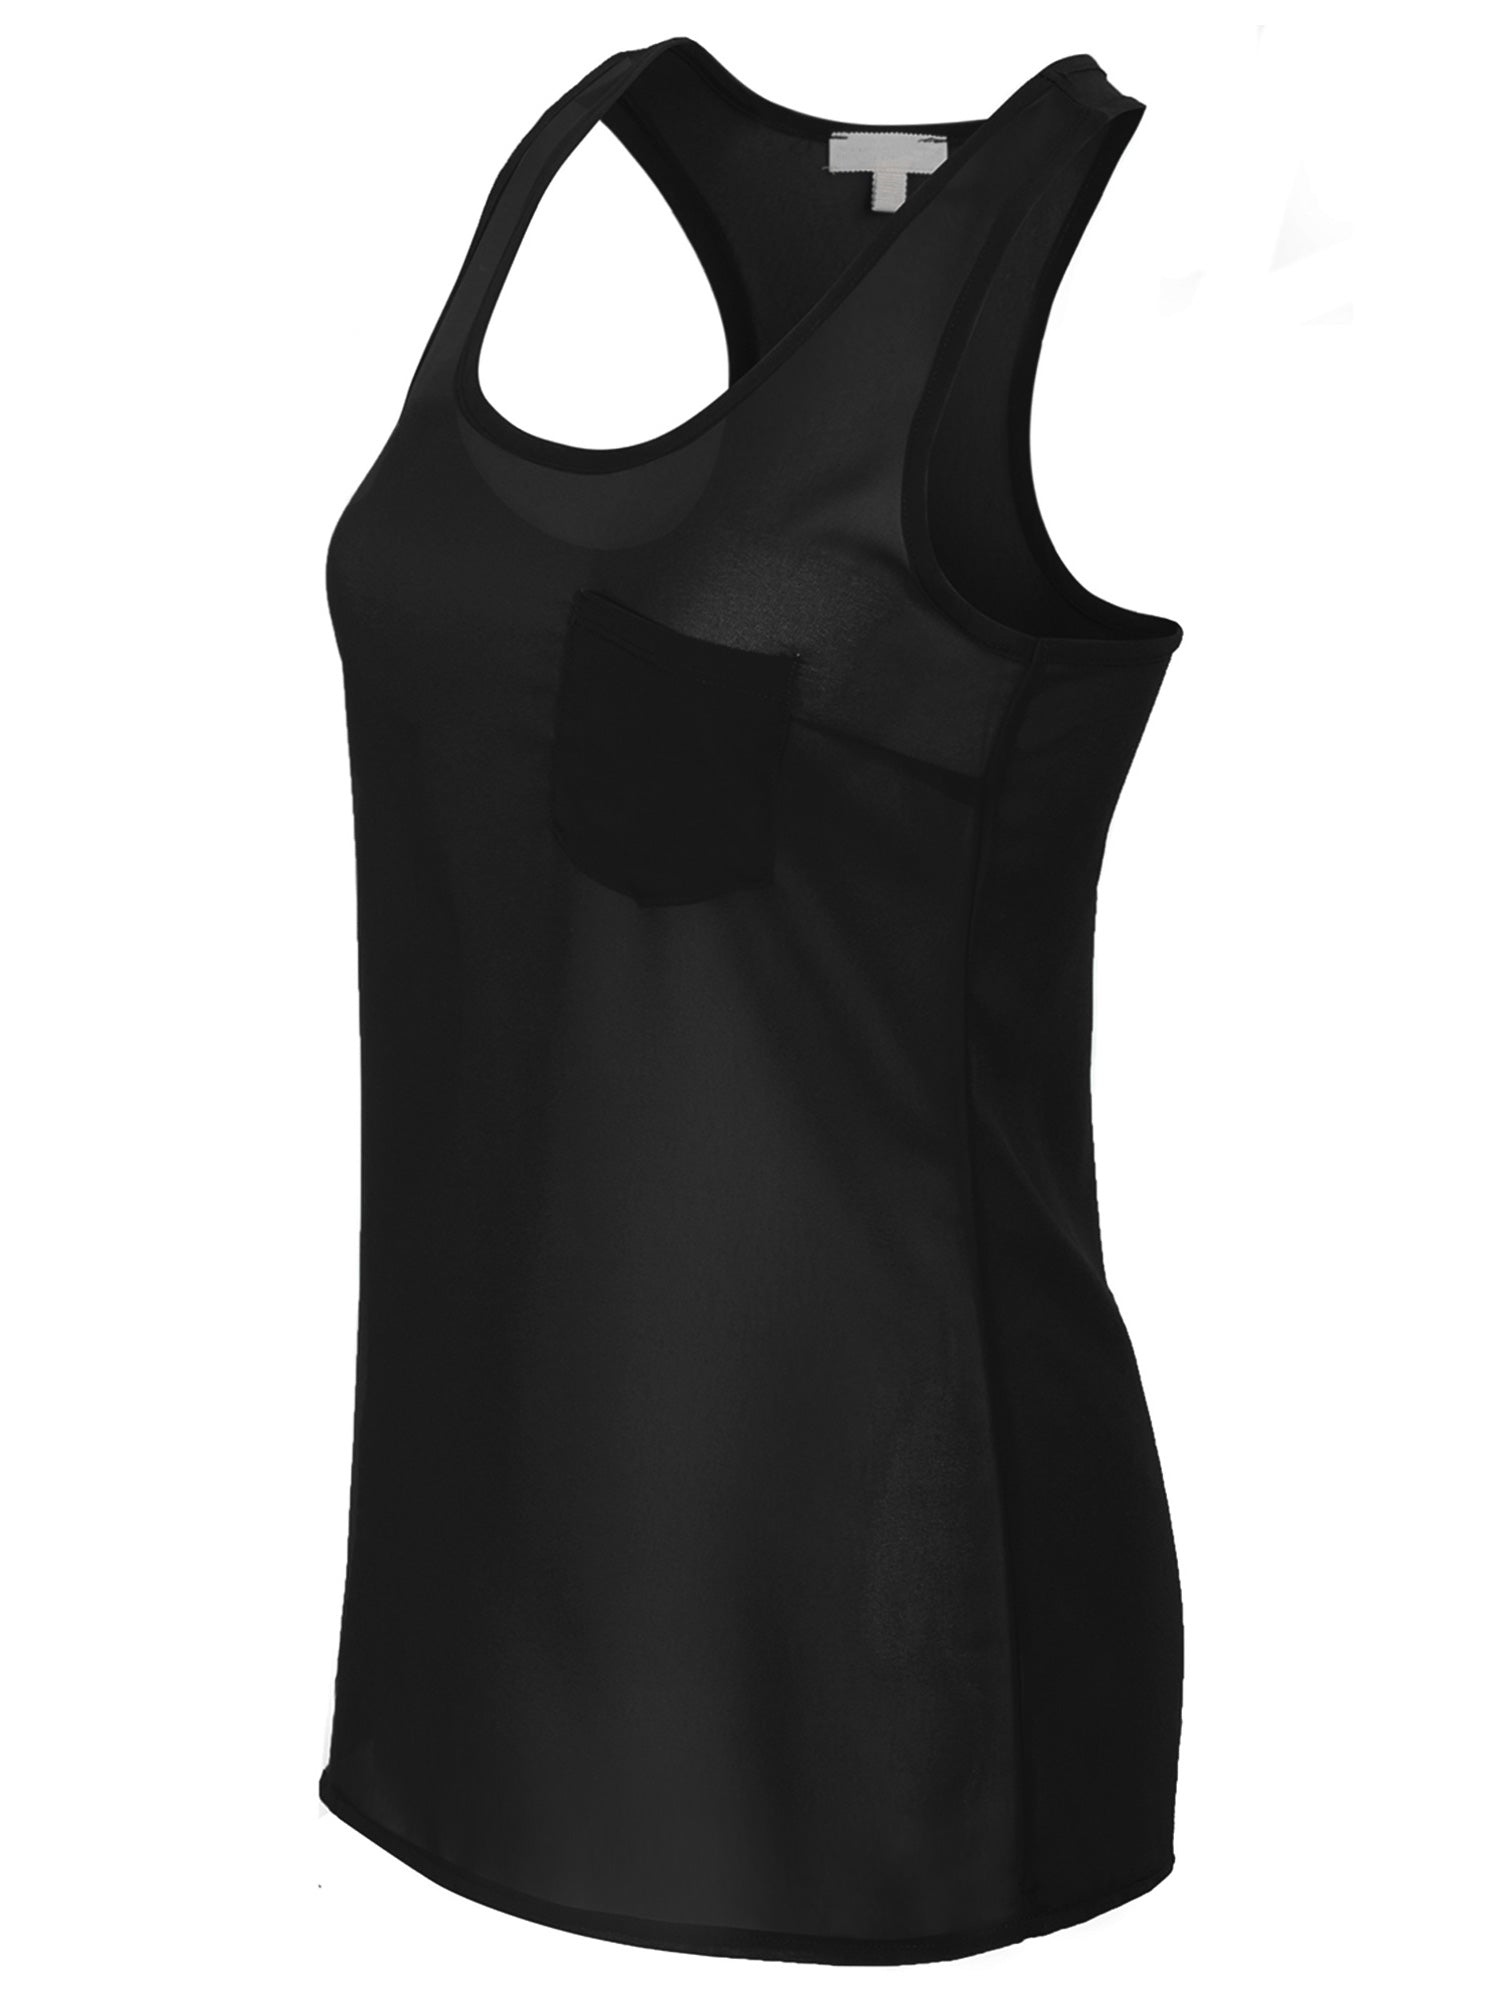 BNWT Glyder Apparel Slash Tank Small (Black), Women's Fashion, Tops, Other  Tops on Carousell